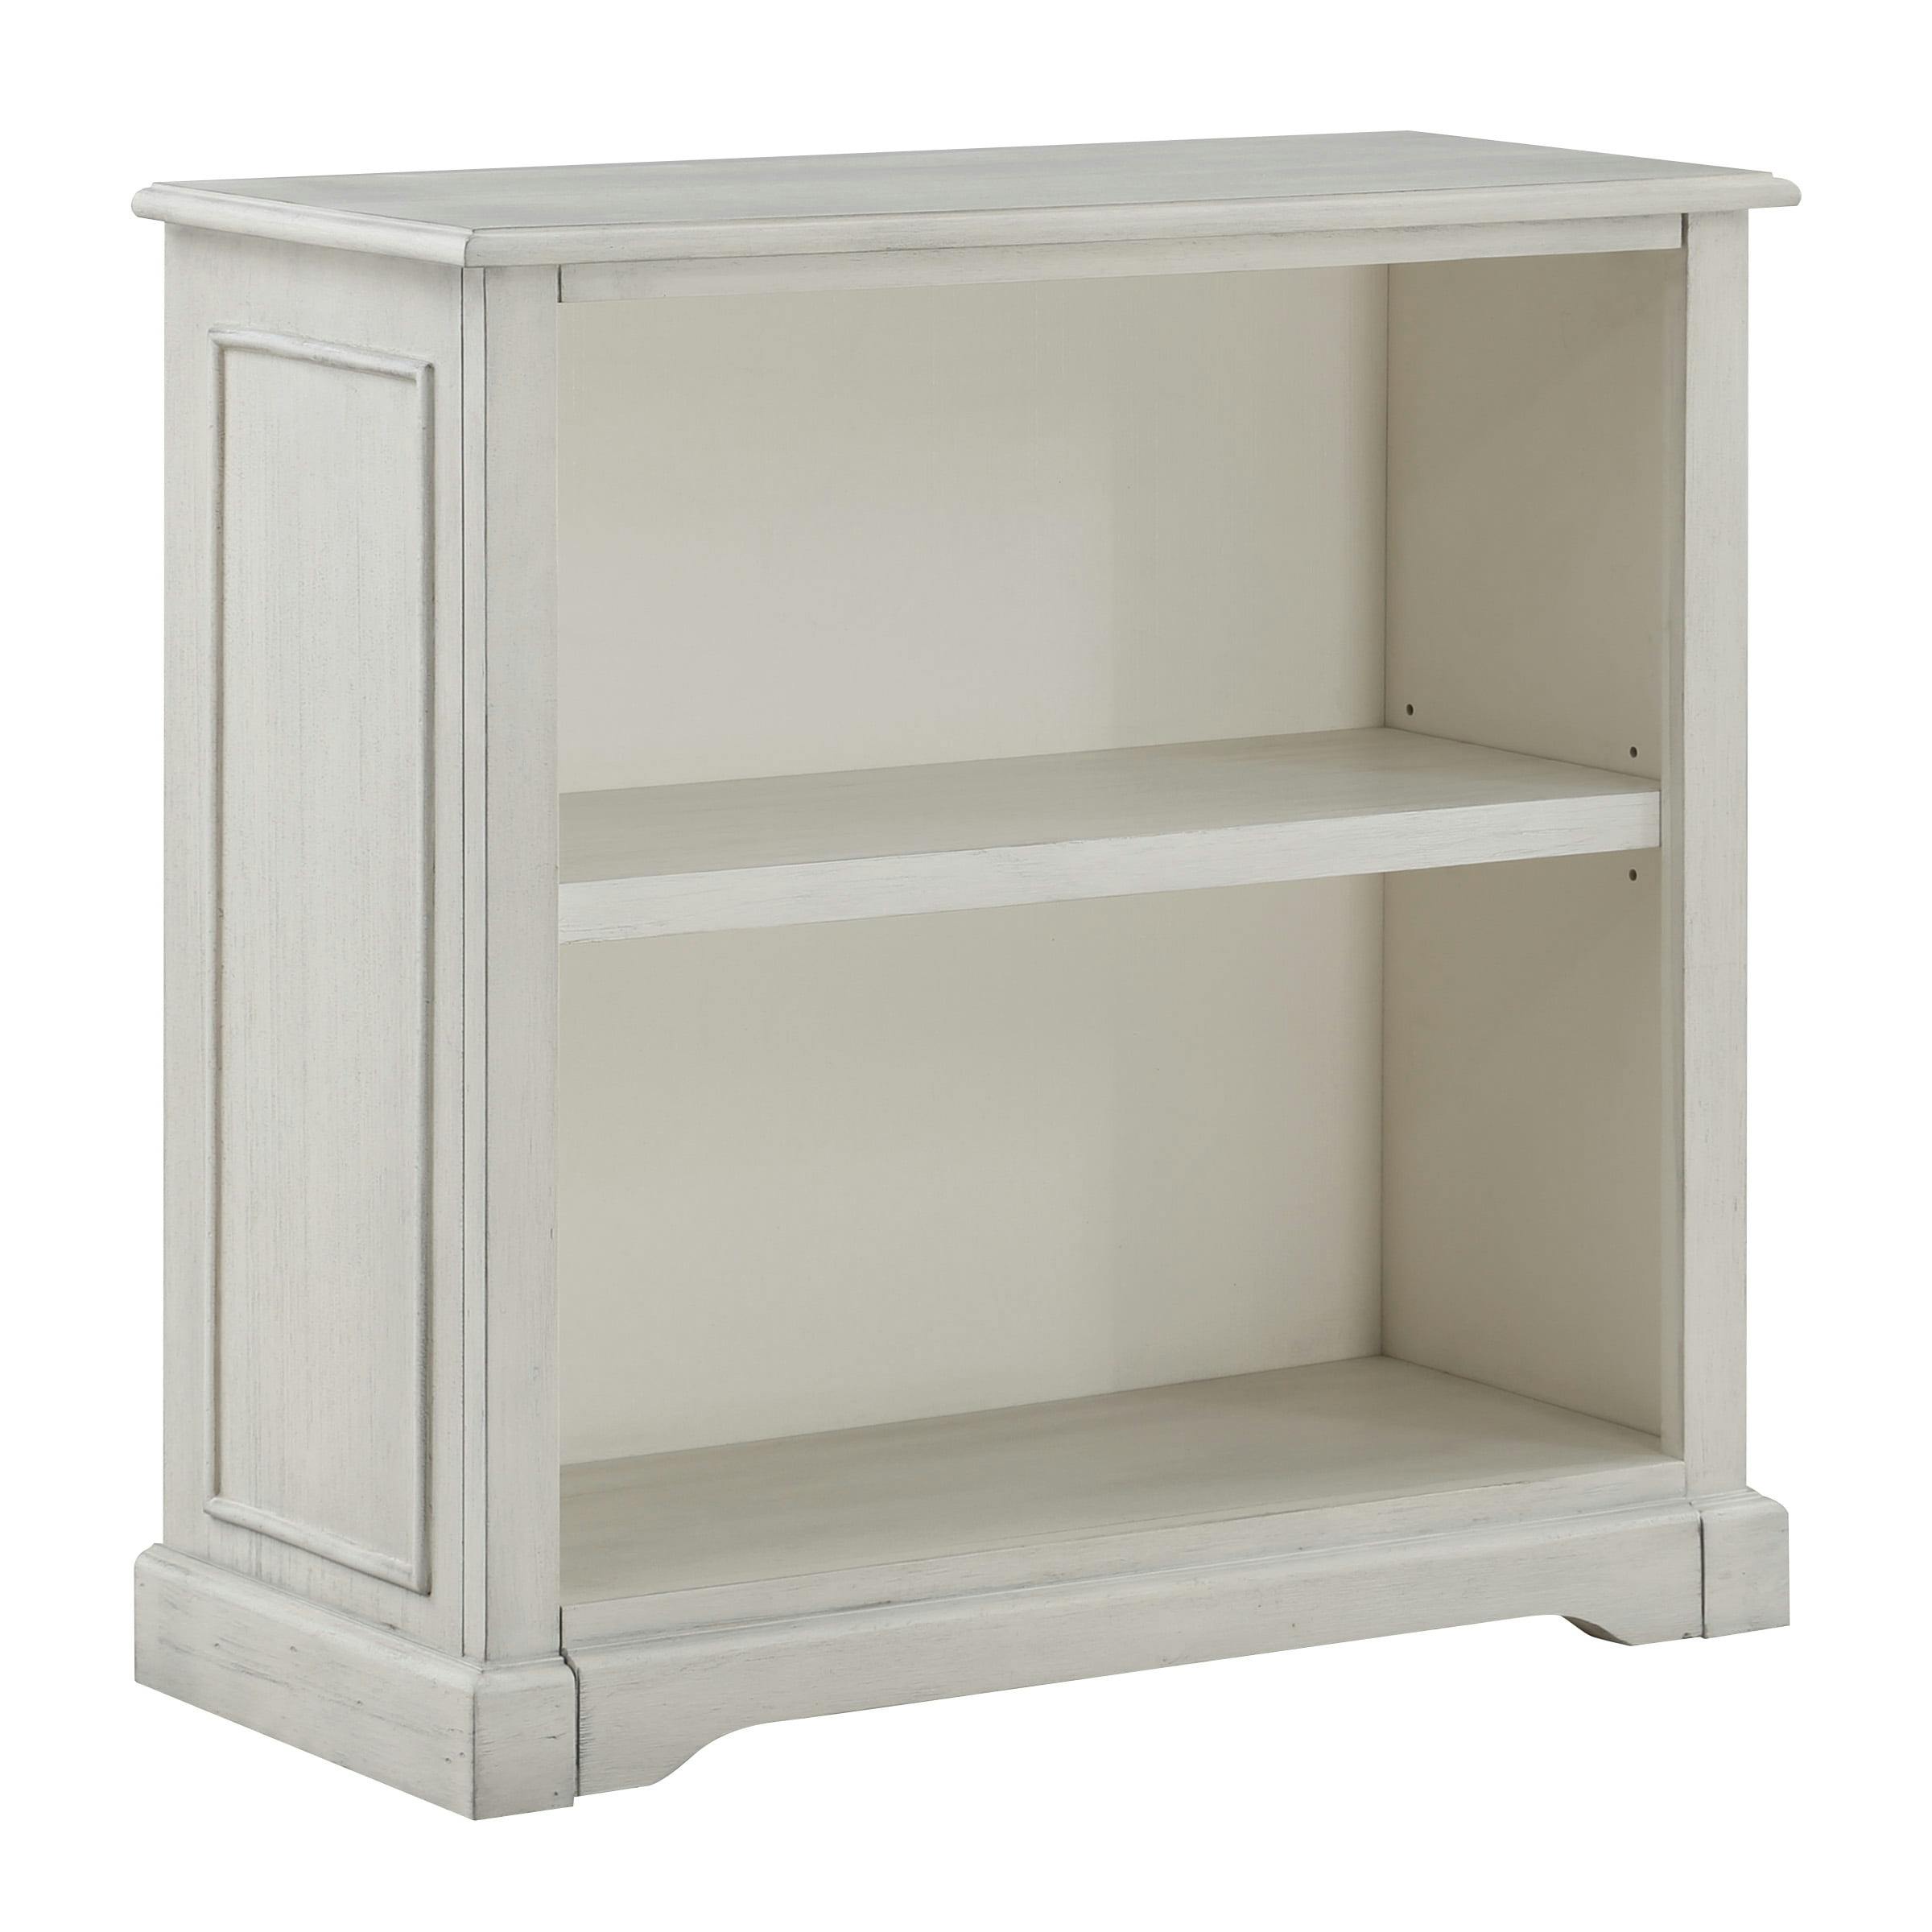 Antique White Solid Wood Classic 2-Shelf Bookcase